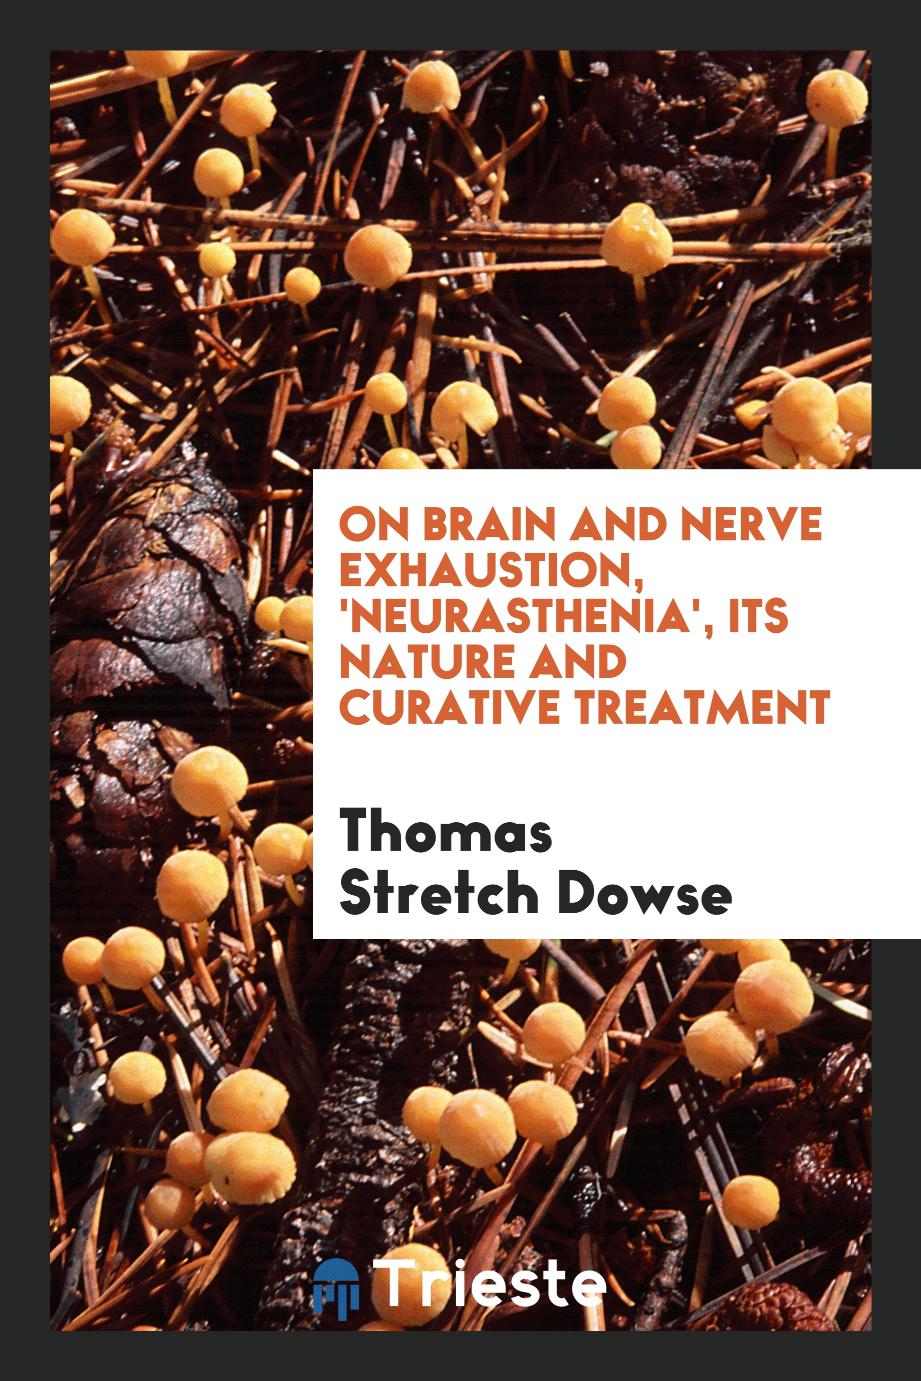 On Brain and Nerve Exhaustion, 'neurasthenia', Its Nature and Curative Treatment